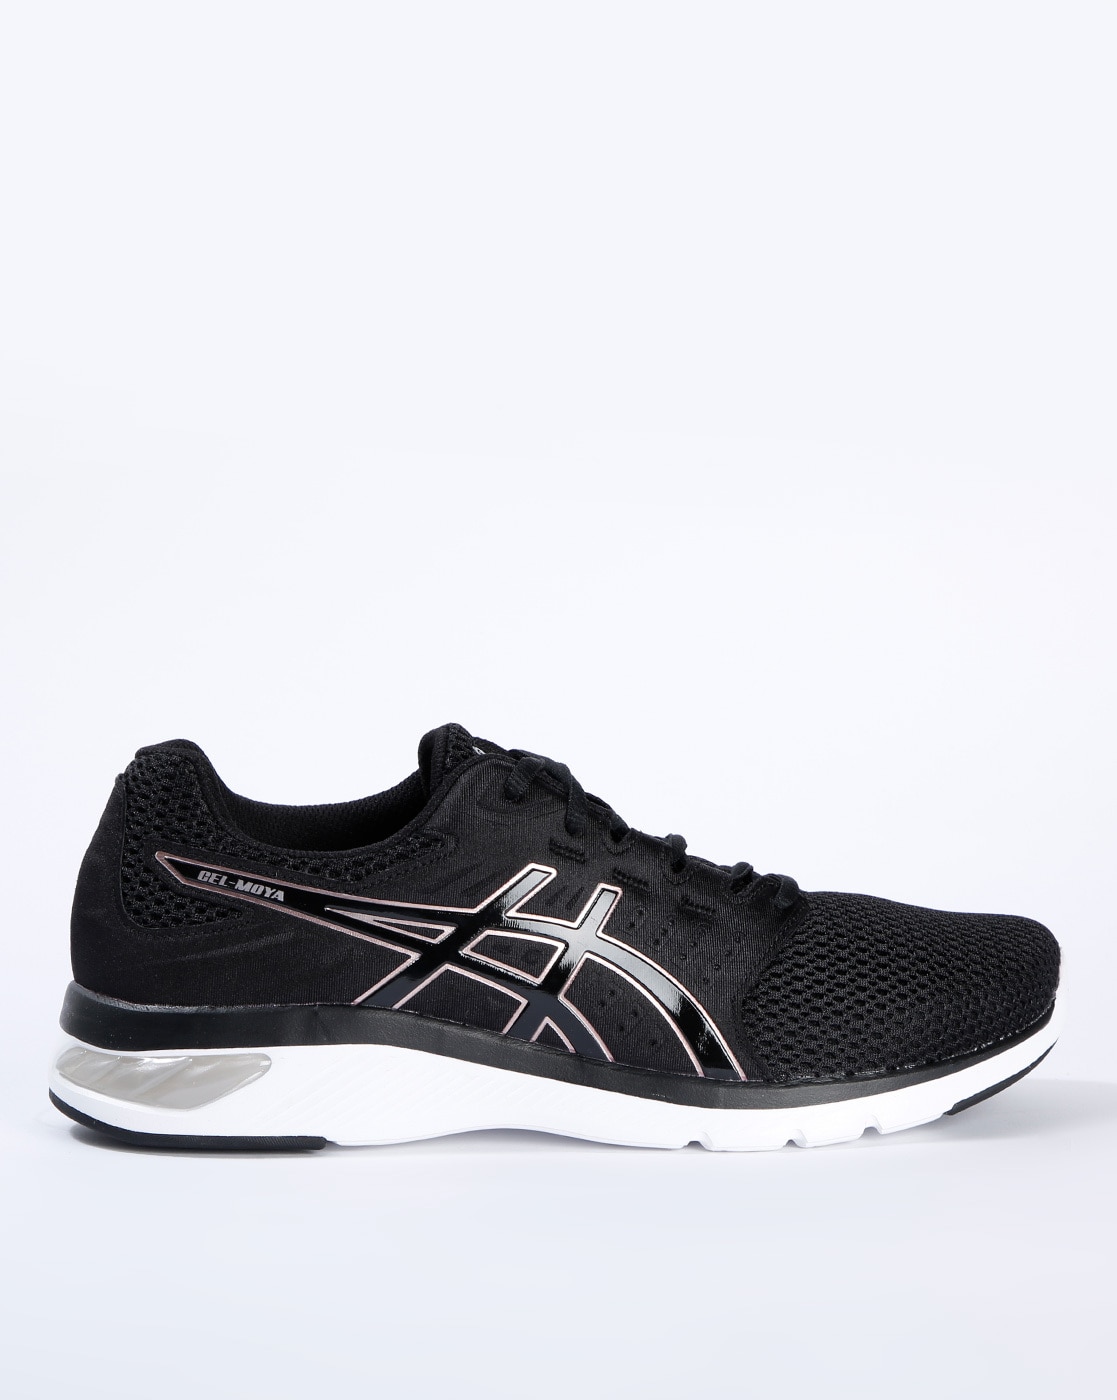 Buy Black Sports Shoes for Men by ASICS 